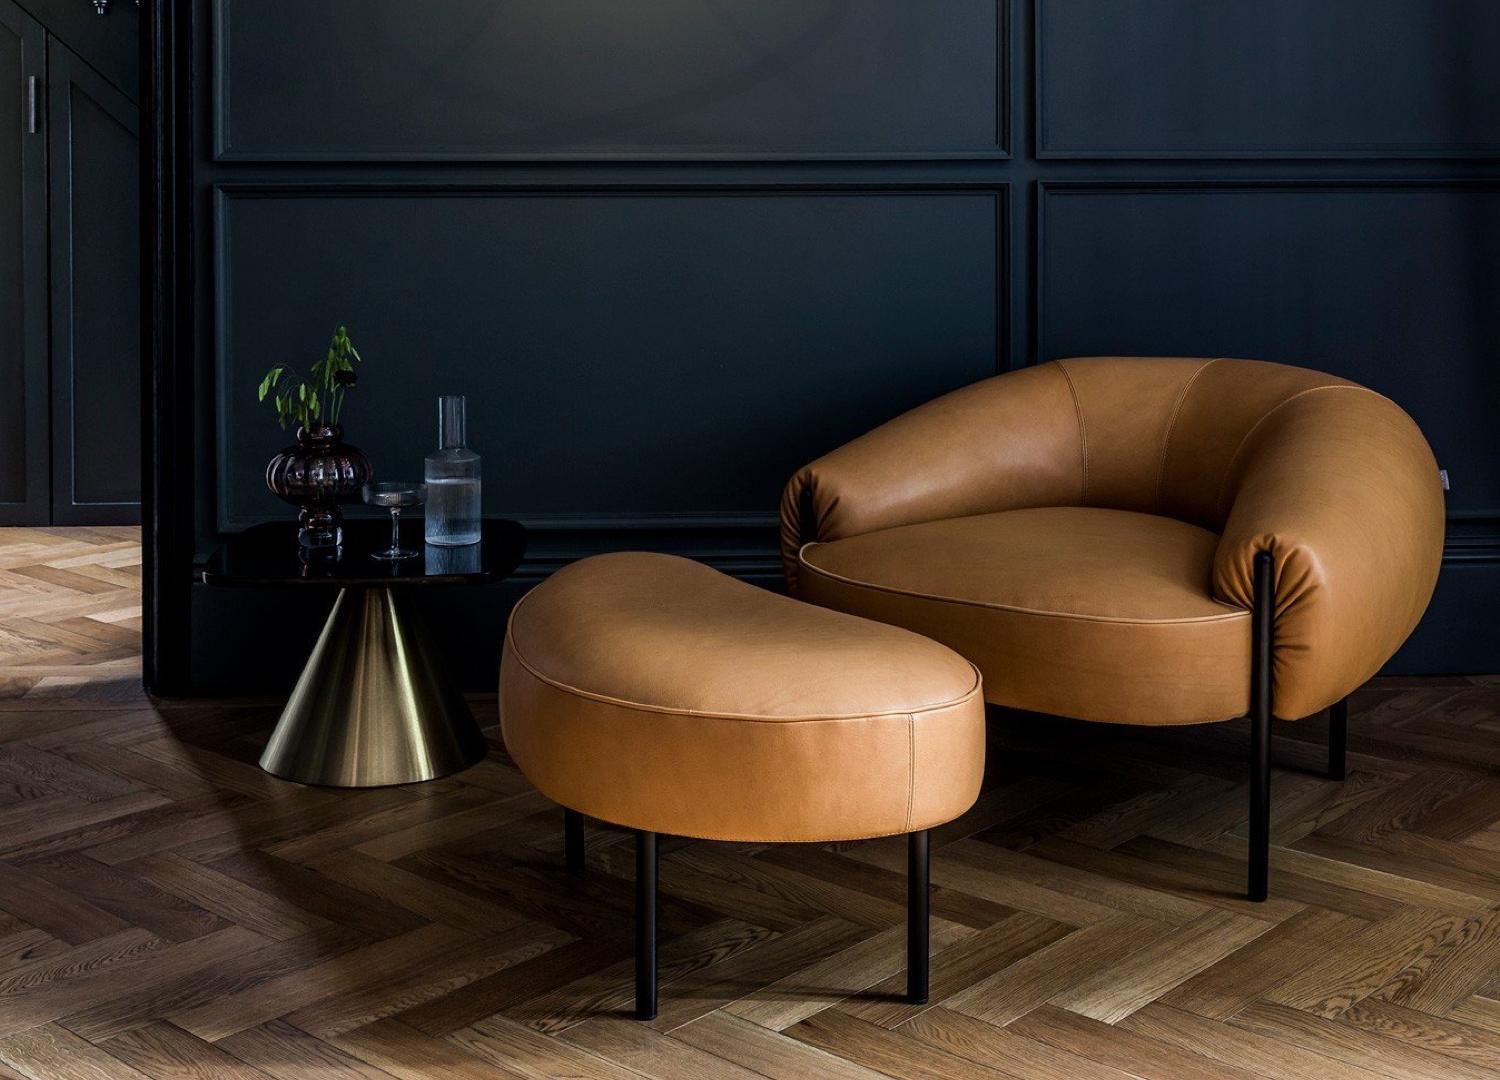 Contemporary Ottoman 'Isola' by Amura Lab 
Designer: Lucy Kurrein

Model shown: Textile - Daino 01

Dimensions : 
- Ottoman : H. 45 x W. 89 x D. 51 cm

“Isola: icon of the future” Isola is a statement of intent, a design collection comprising sofas,